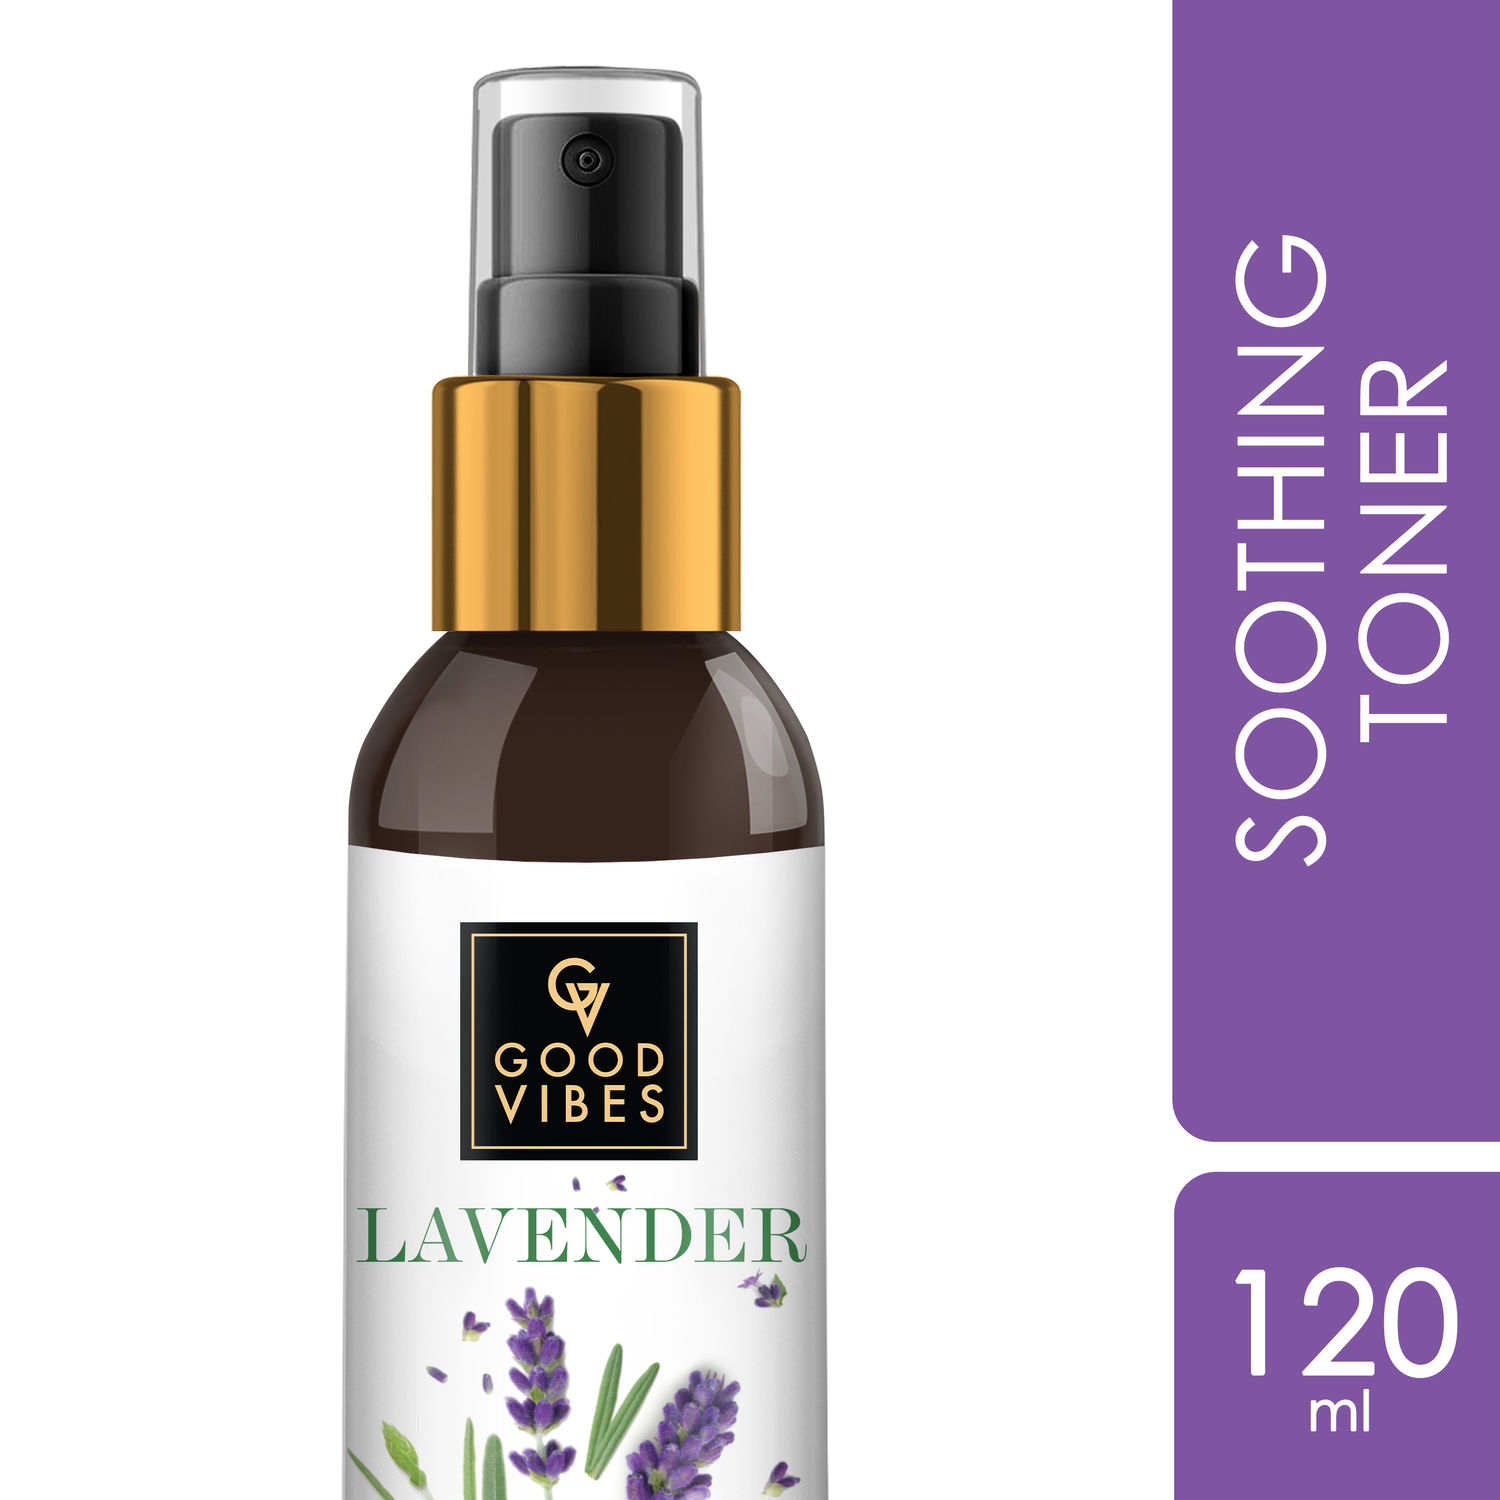 Buy Good Vibes Lavender Soothing Toner | Deep Cleansing, Lightening | No Parabens, No Alcohol, No Sulphates, No Mineral Oil, No Animal Testing (120 ml) - Purplle